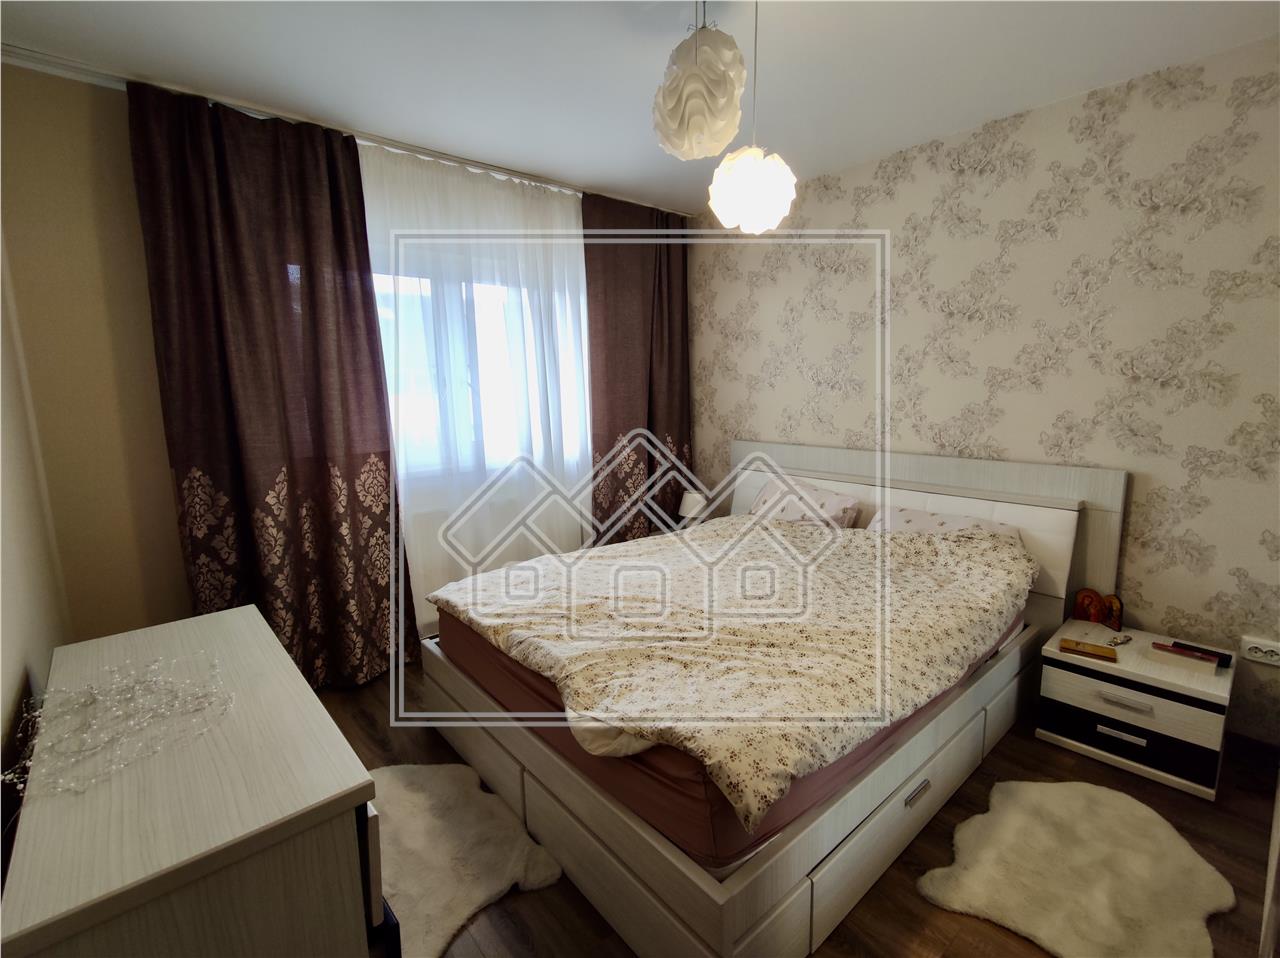 Apartment for sale - 3 rooms, 2 bathrooms - Brana area - modern